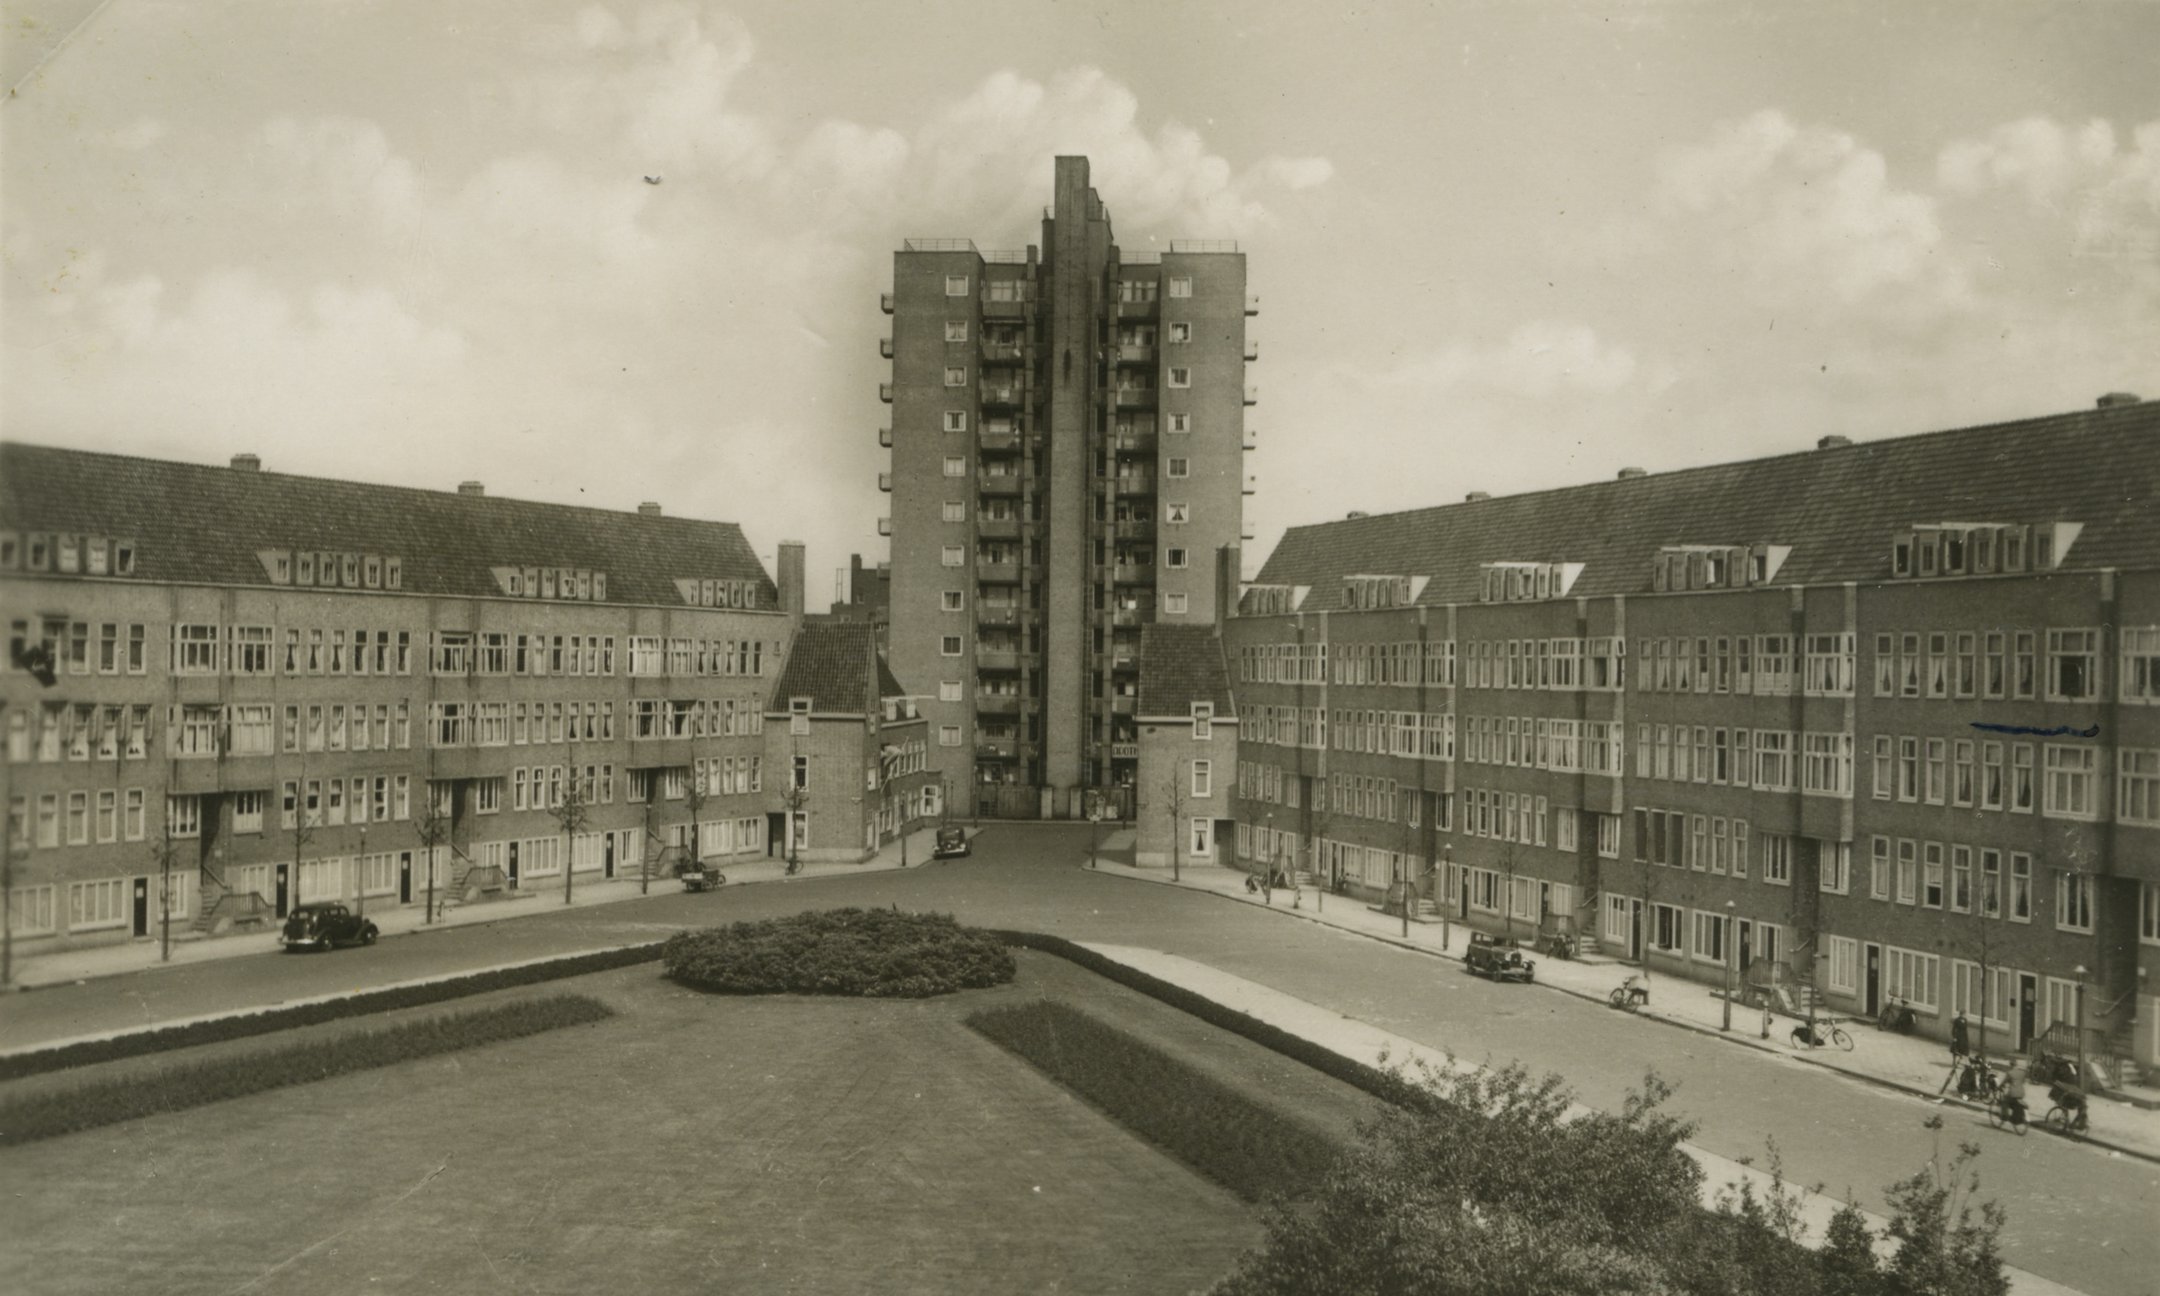 Postcard from the 1930s, showing Merwedeplein. With a pen is indicated (right, centre) where the Frank family lives.